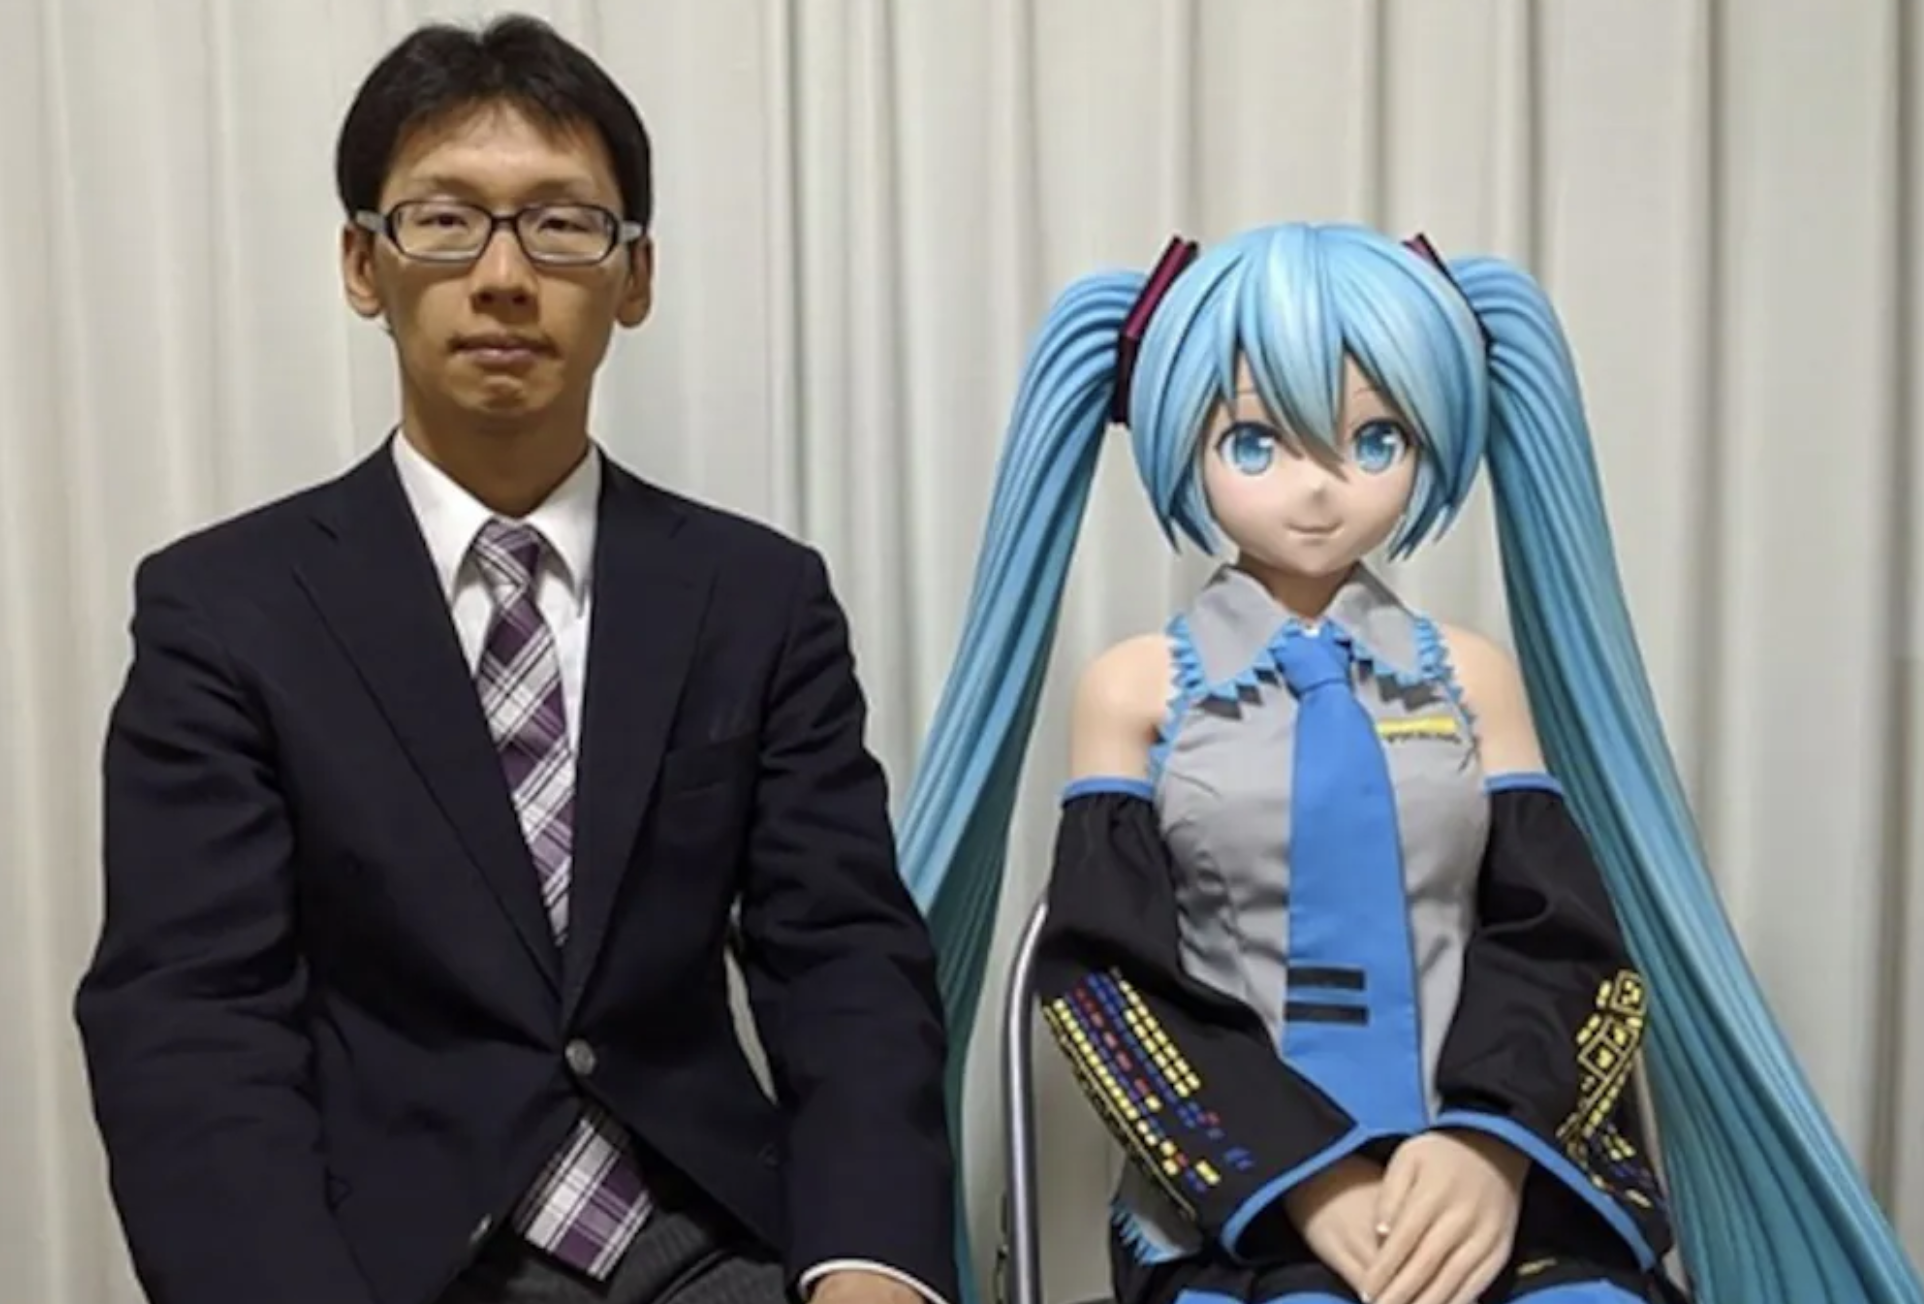 If you love that virtual pop star so much, why don’t you marry it?  That’s the question that Japanese government worker Akihiko Kondo evidently took to heart, wedding blue-haired cartoon singer Hatsune Miku in a $17,300 ceremony back in 2018.